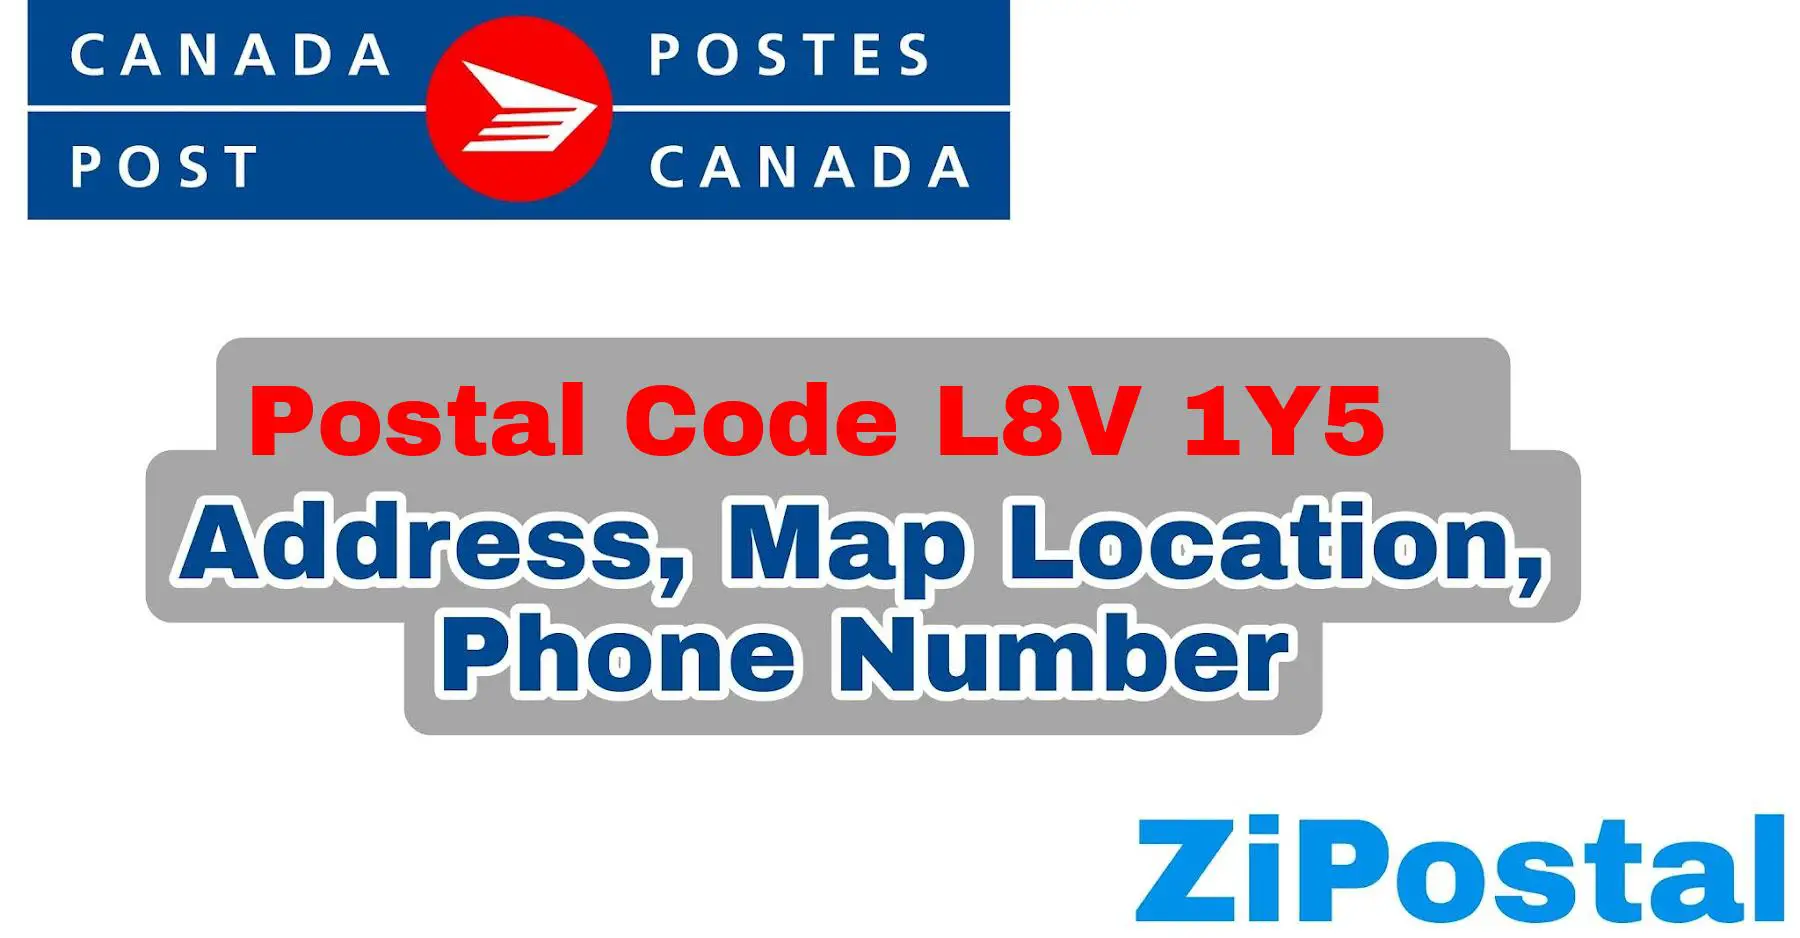 Postal Code L8V 1Y5 Address Map Location and Phone Number